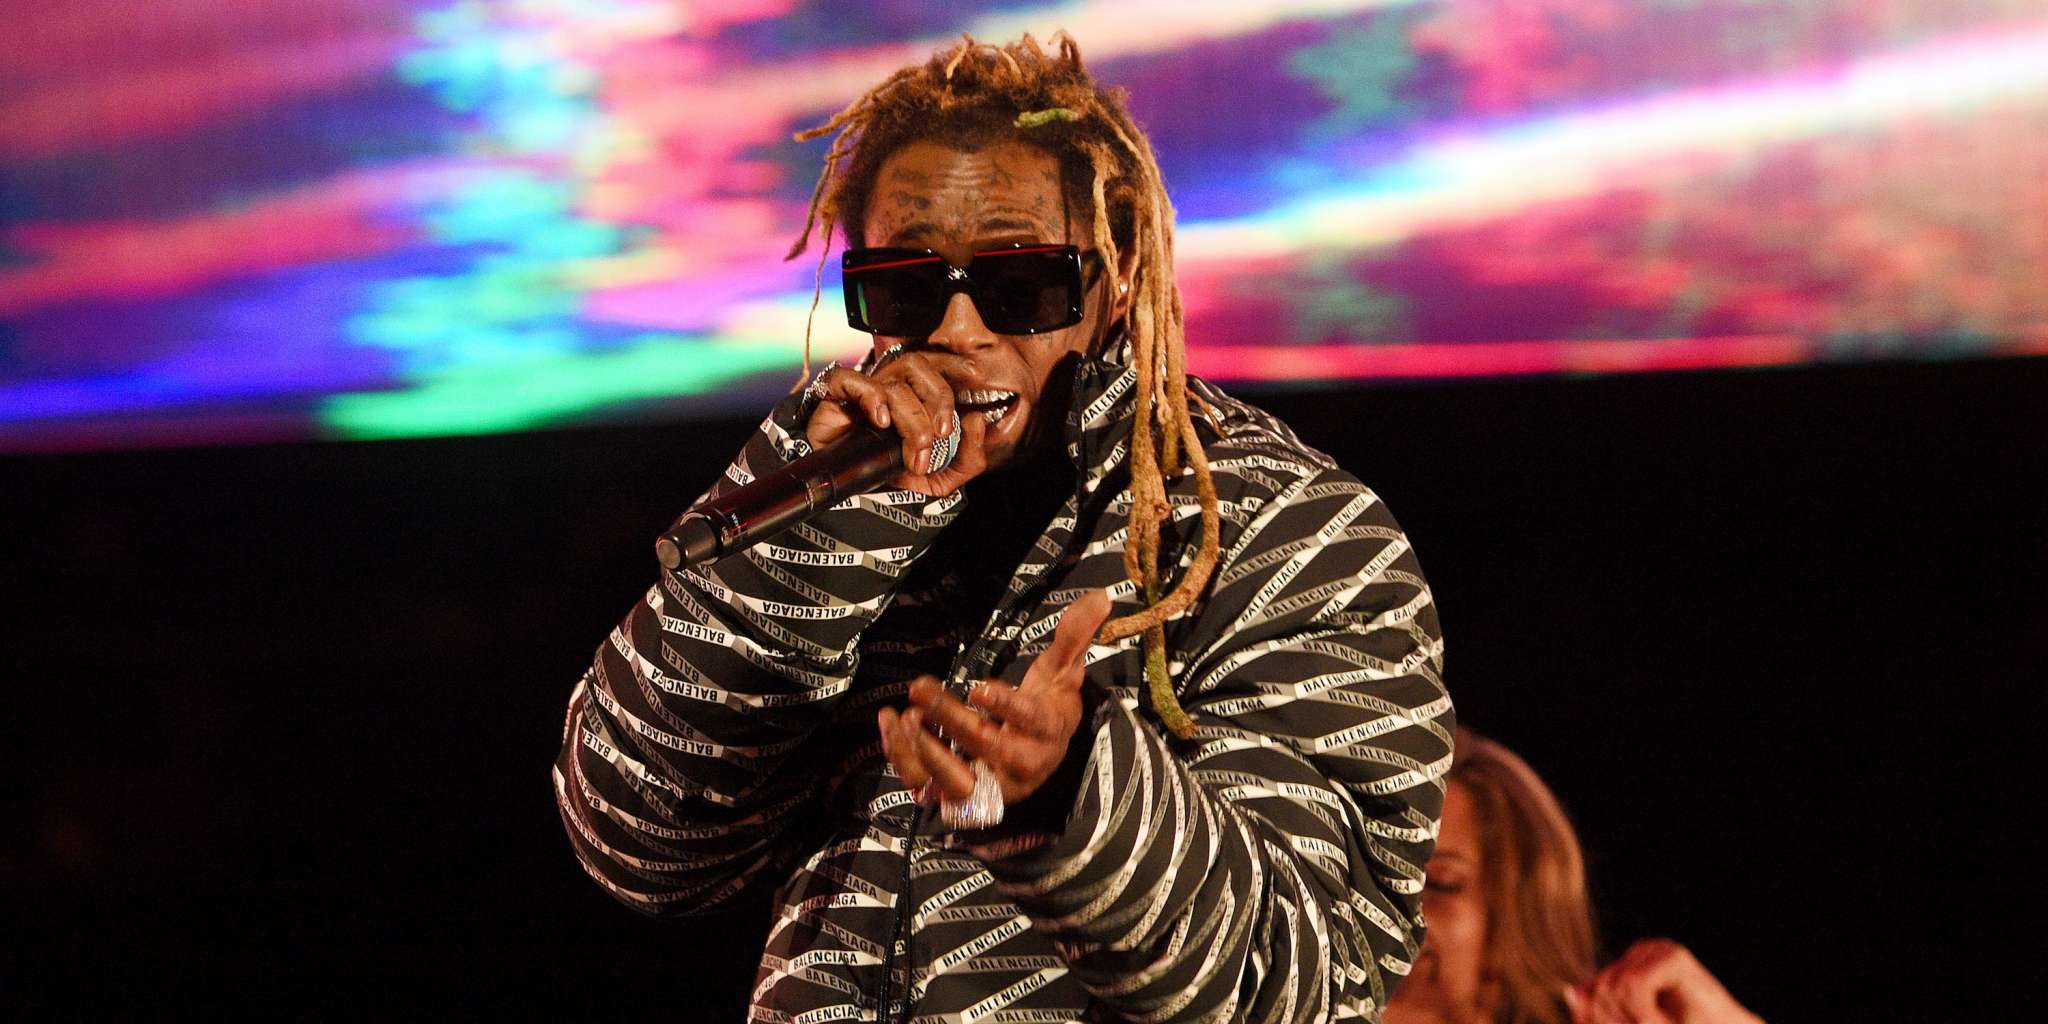 ”lil-wayne-is-in-the-spotlight-following-former-security-guards-accusations”